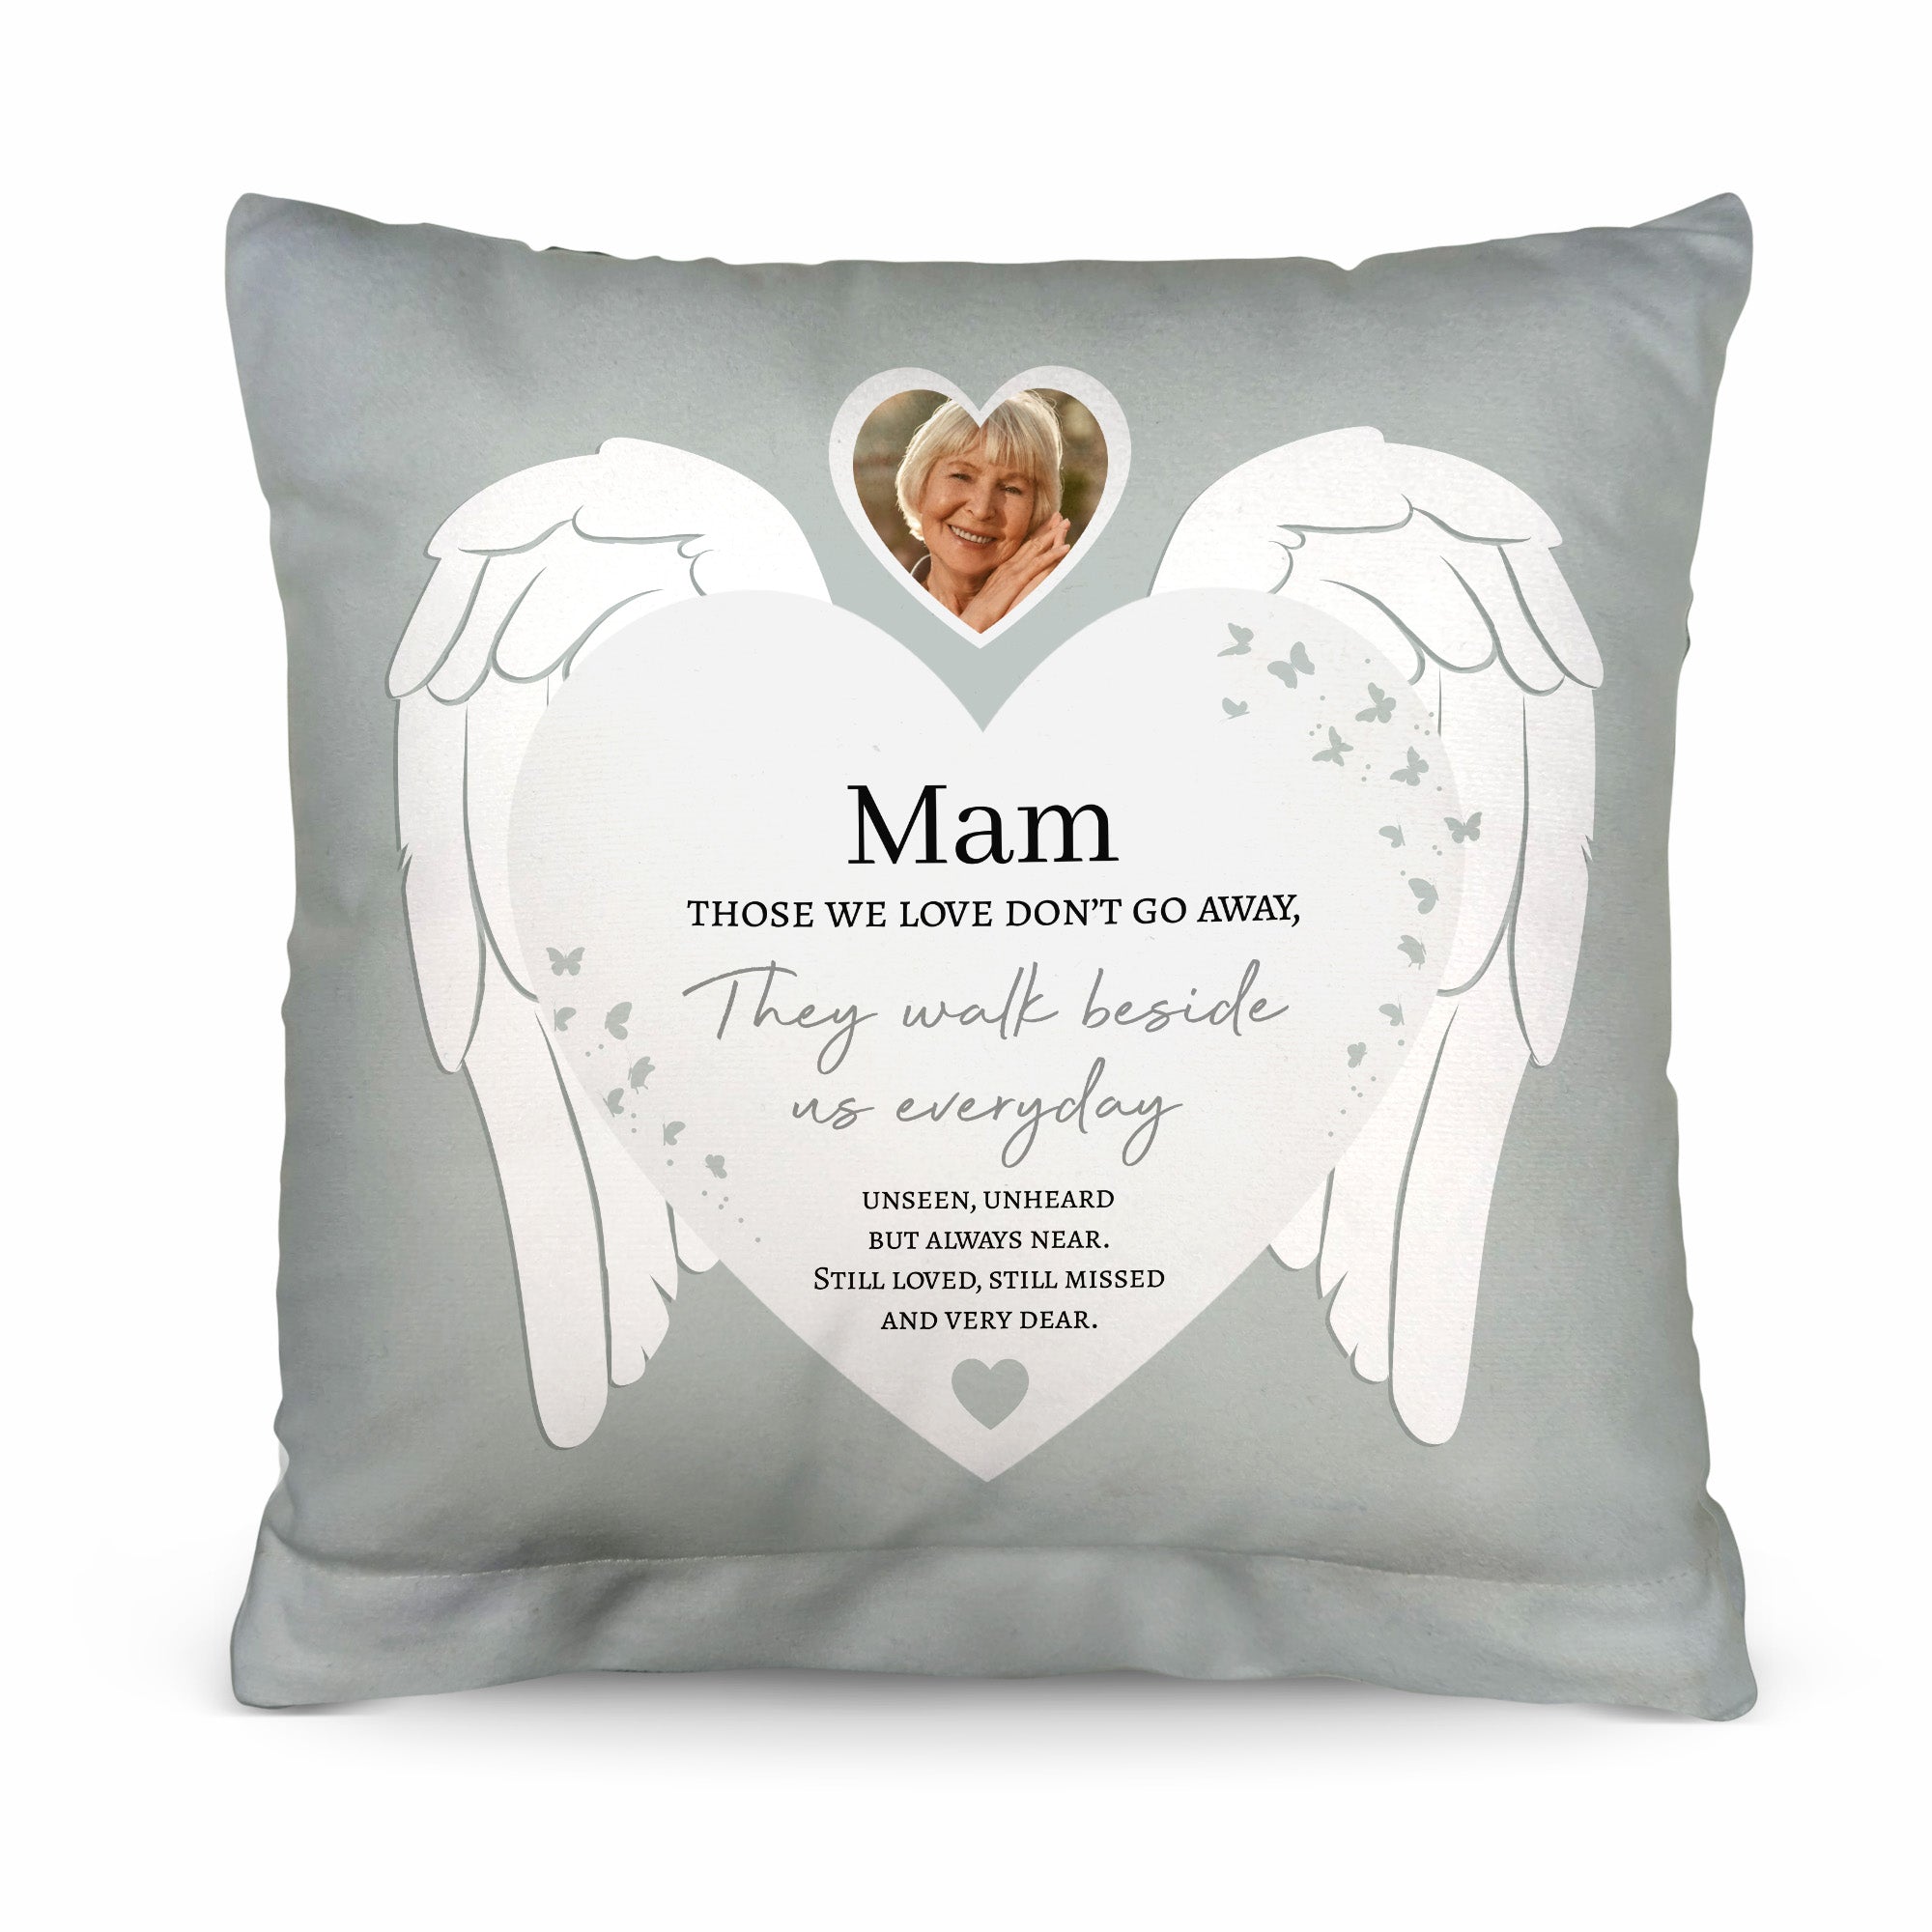 Those we love don’t go away - Personalised Memory Cushion - Two Sizes